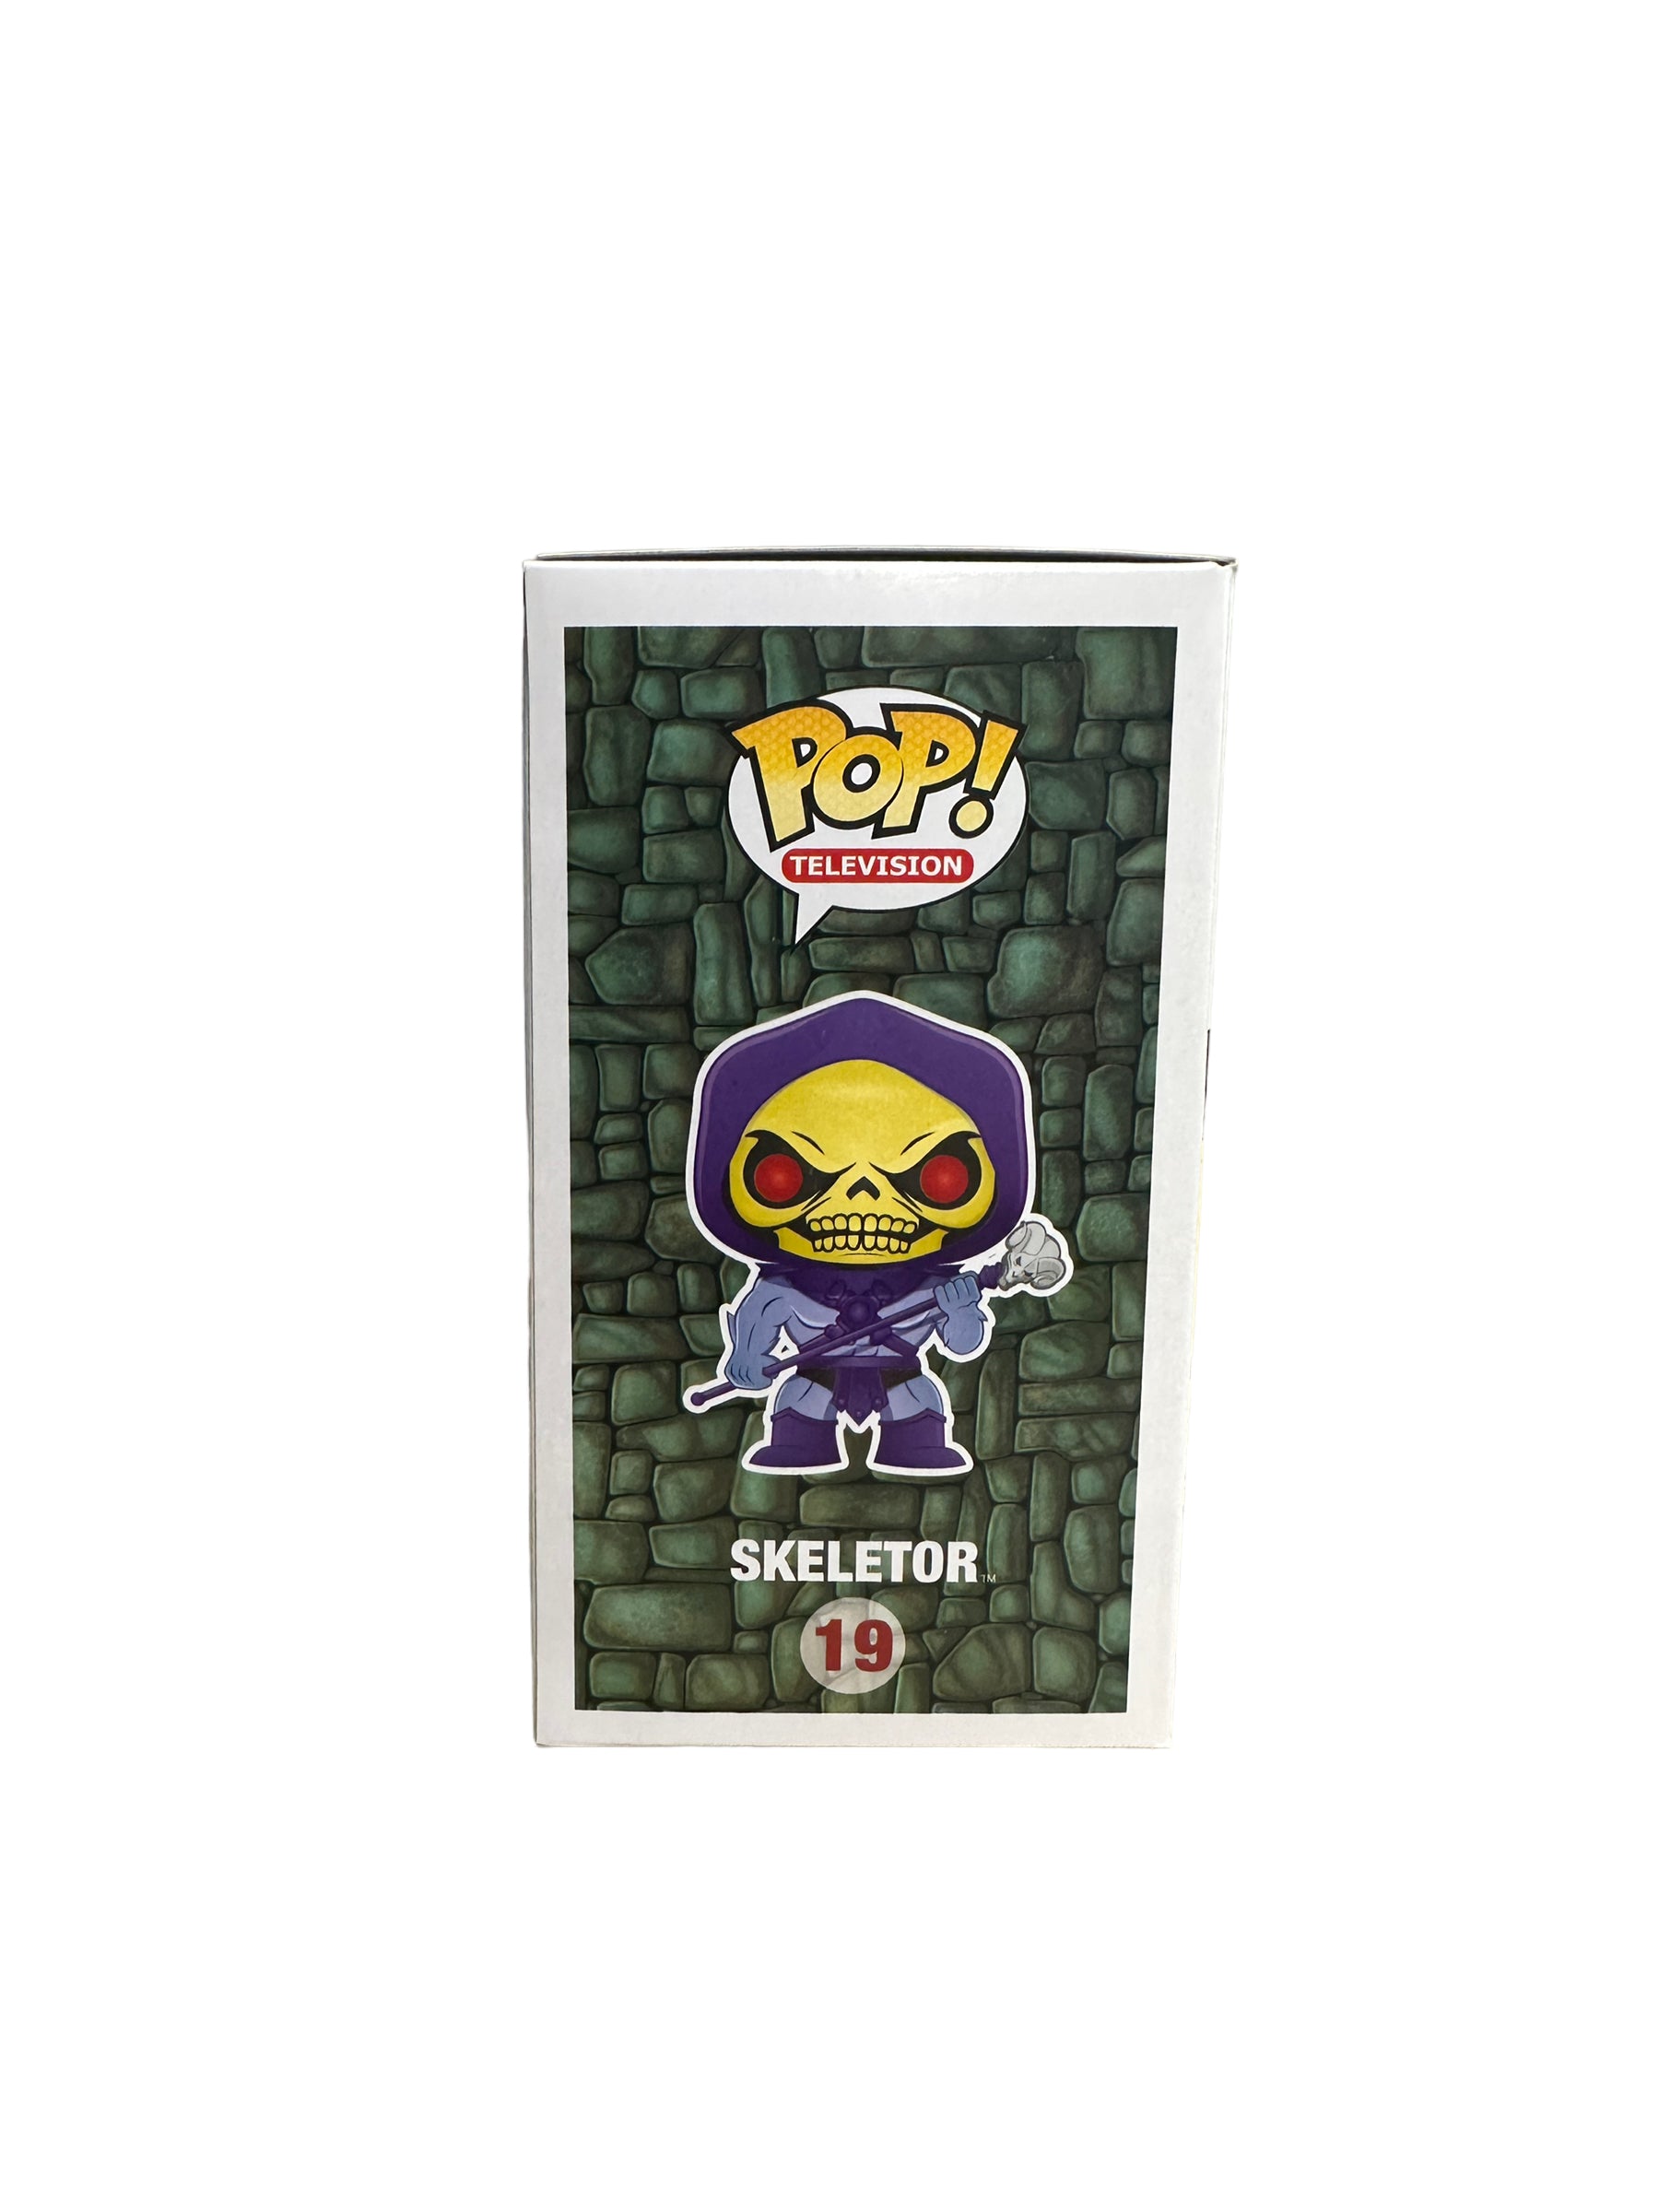 Skeletor #19 (Glows in the Dark) Funko Pop! - Masters of the Universe - Gemini Collectibles Exclusive LE480 Pcs - Condition 8.75/10